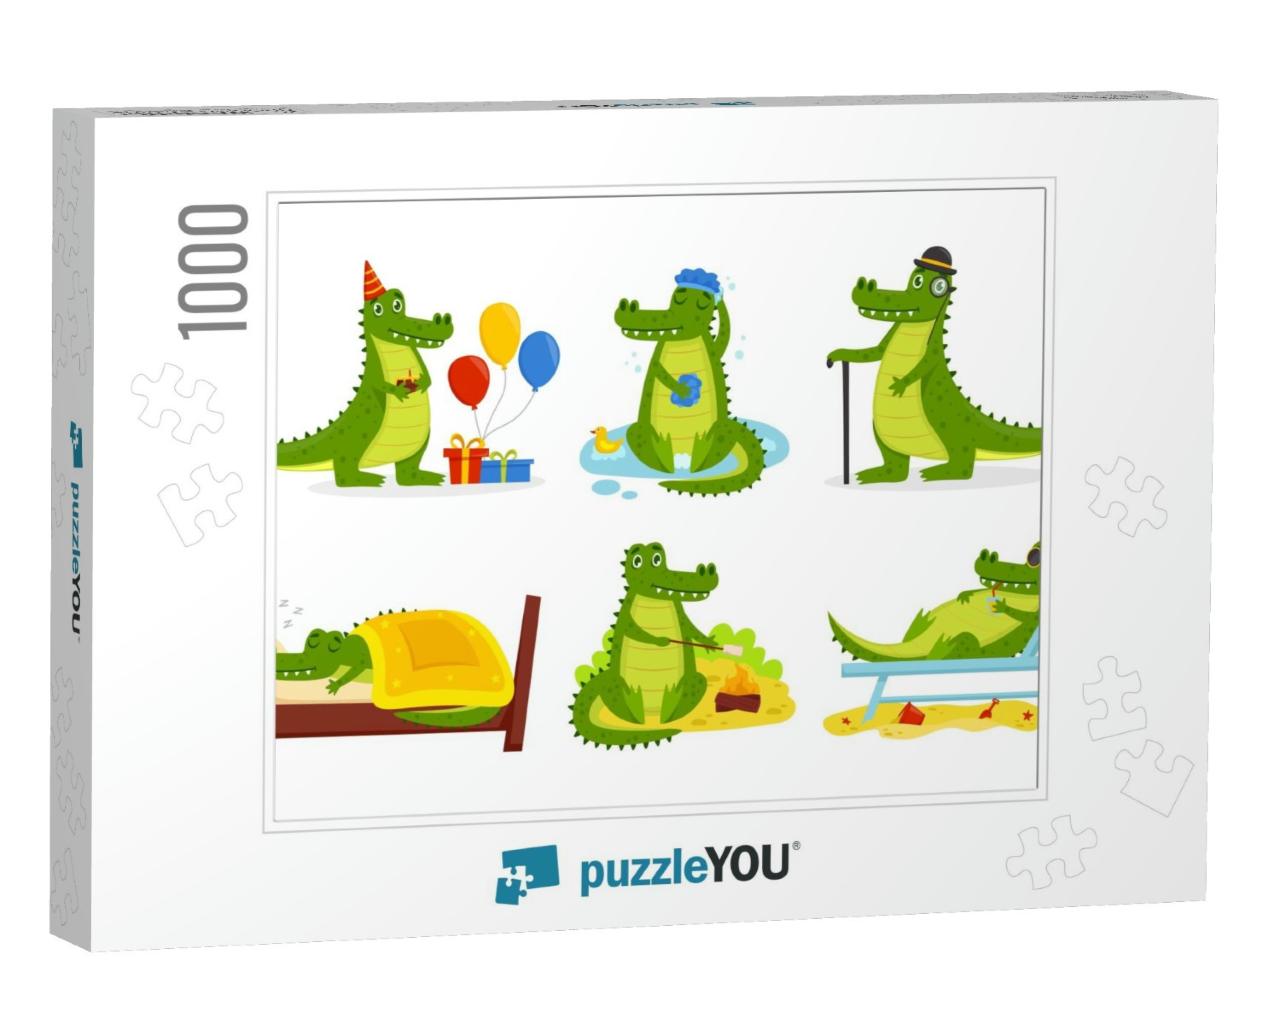 Crocodile Cartoon Characters Set. Cute Alligators Collect... Jigsaw Puzzle with 1000 pieces